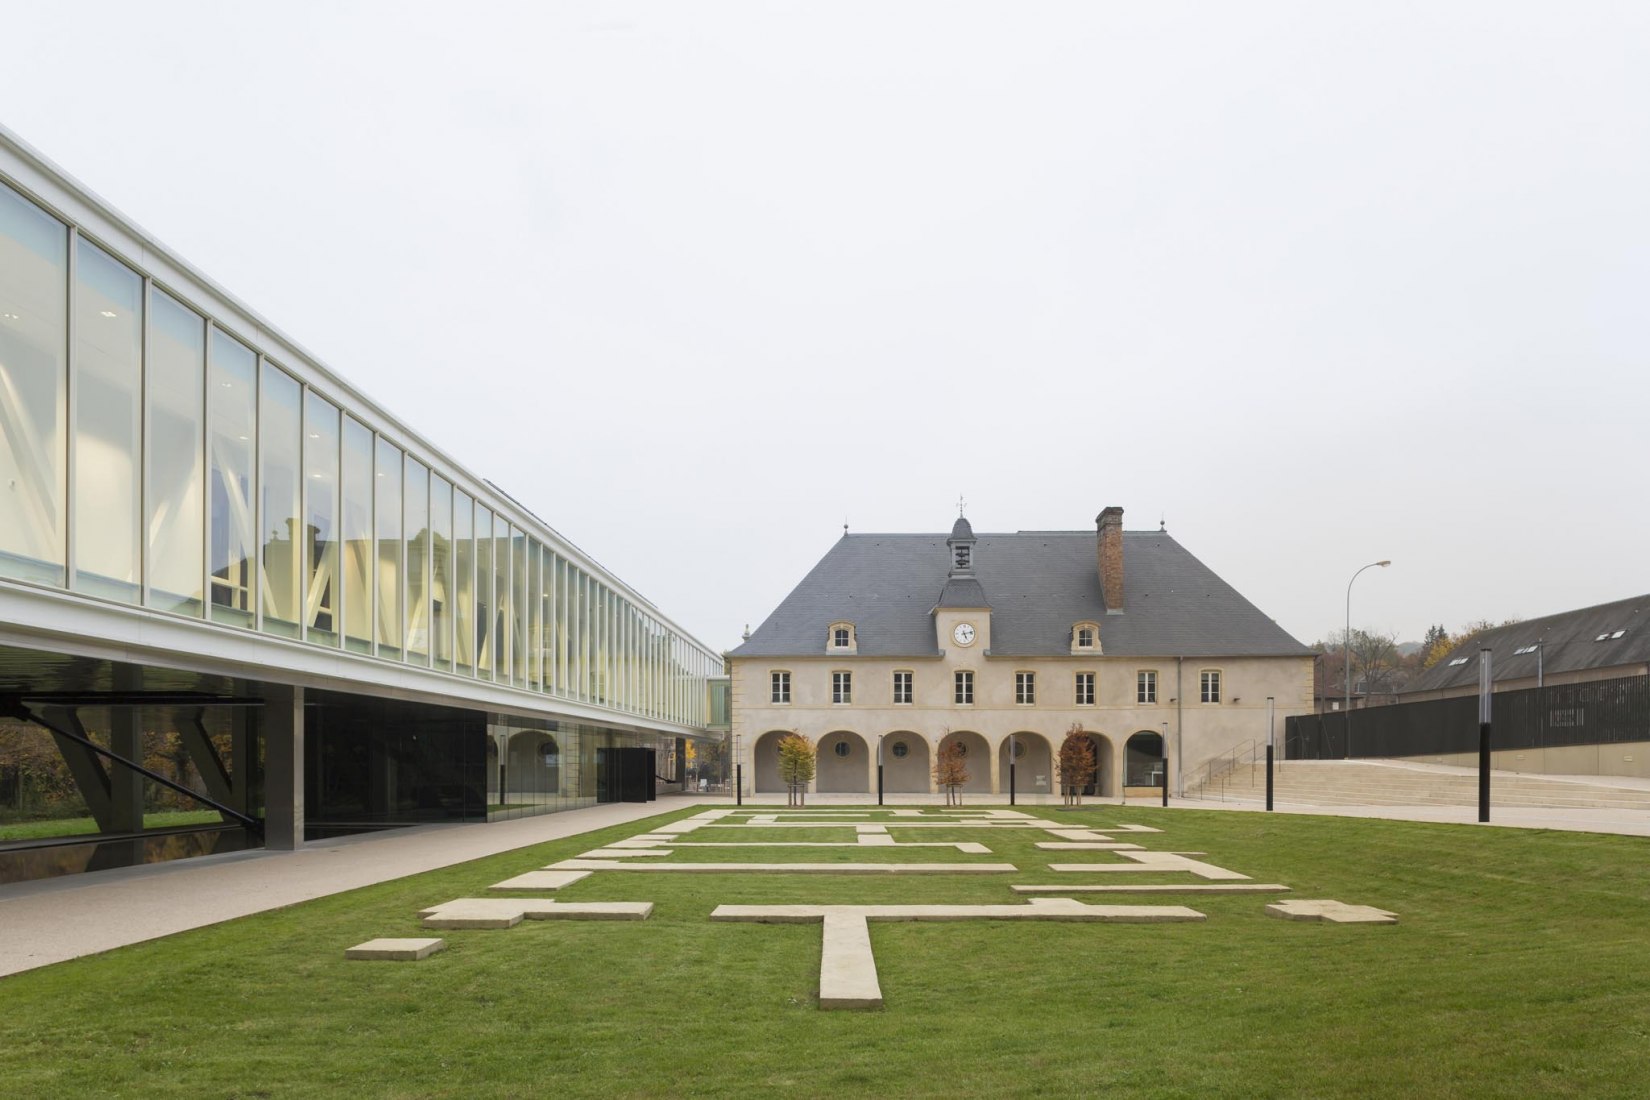 Transformation of Wendel Castle into a civic center, Hayange, Moselle, architect Pierre-Louis Faloci, 2014-2016. Photography by Daniel Osso